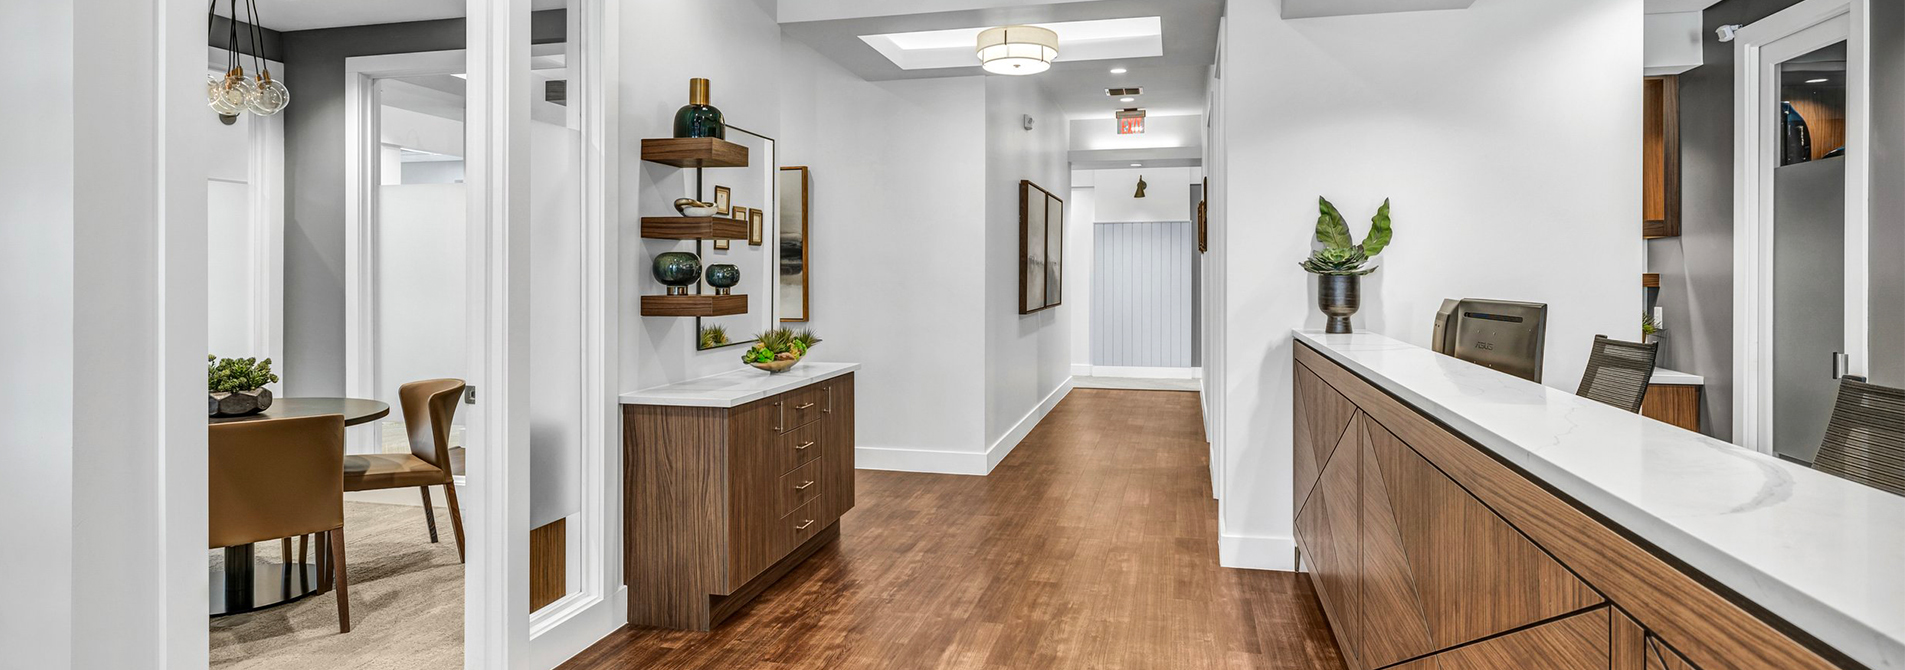 The interior of a newly remodeled dental office reception area